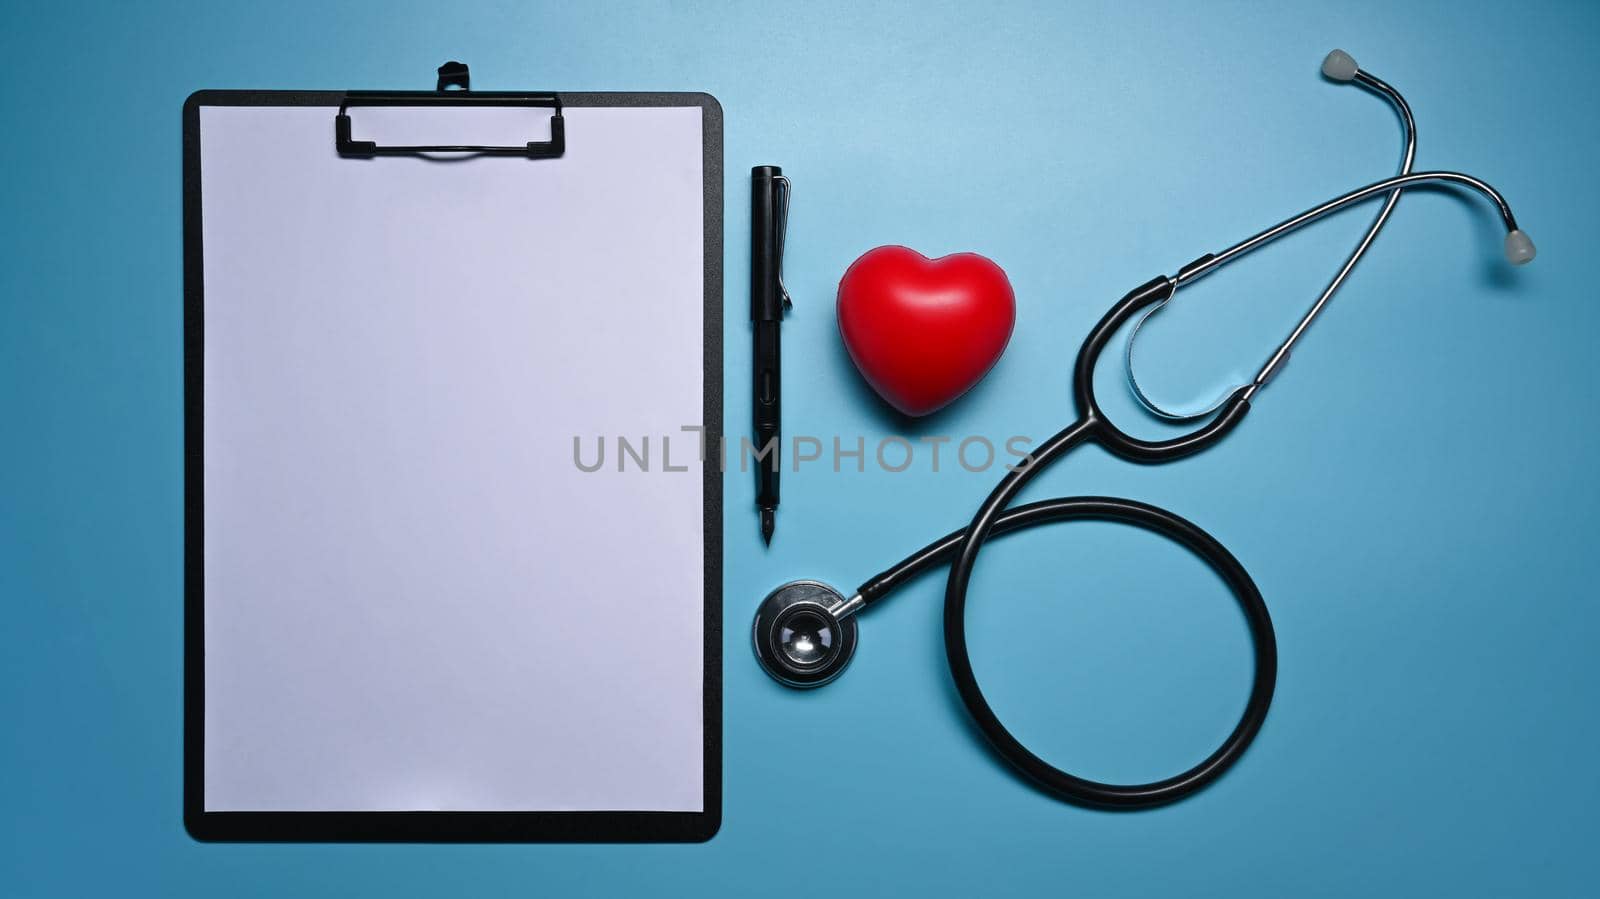 Clipboard, stethoscope and red heart on blue background. Healthcare and medical concept.